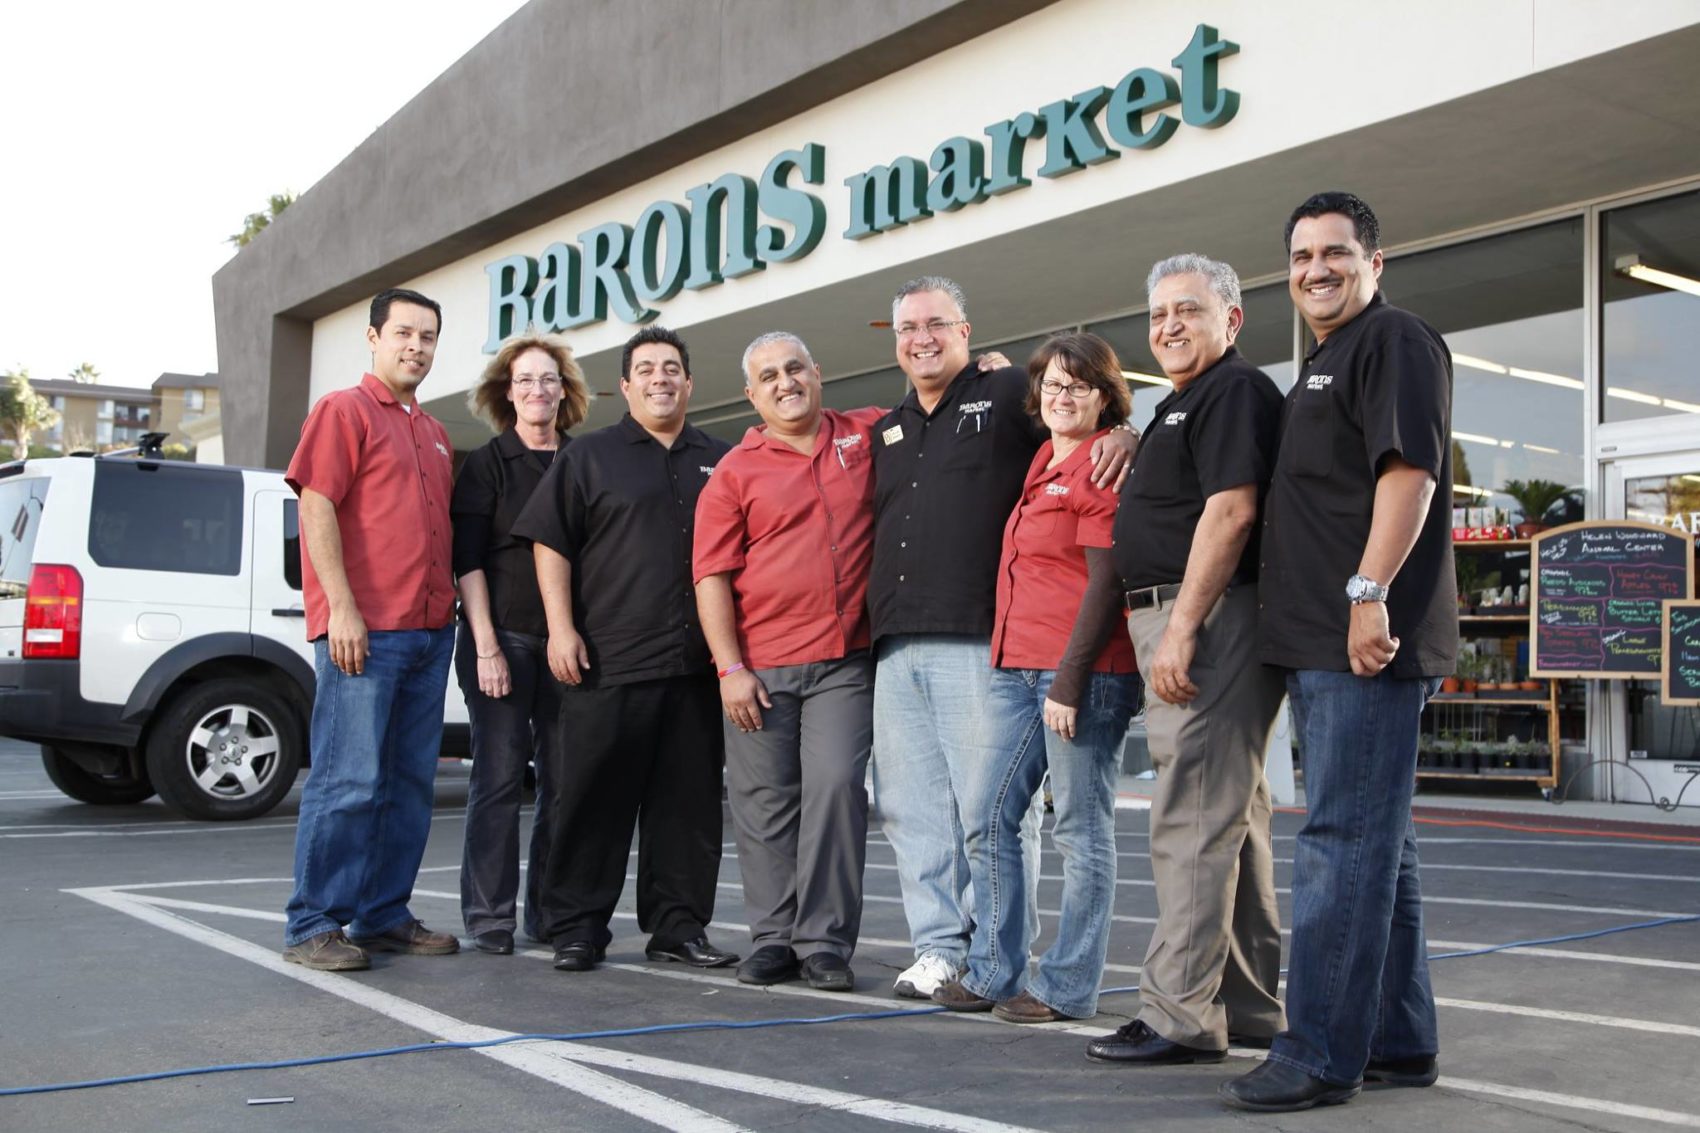 Barons staff standing in front of market